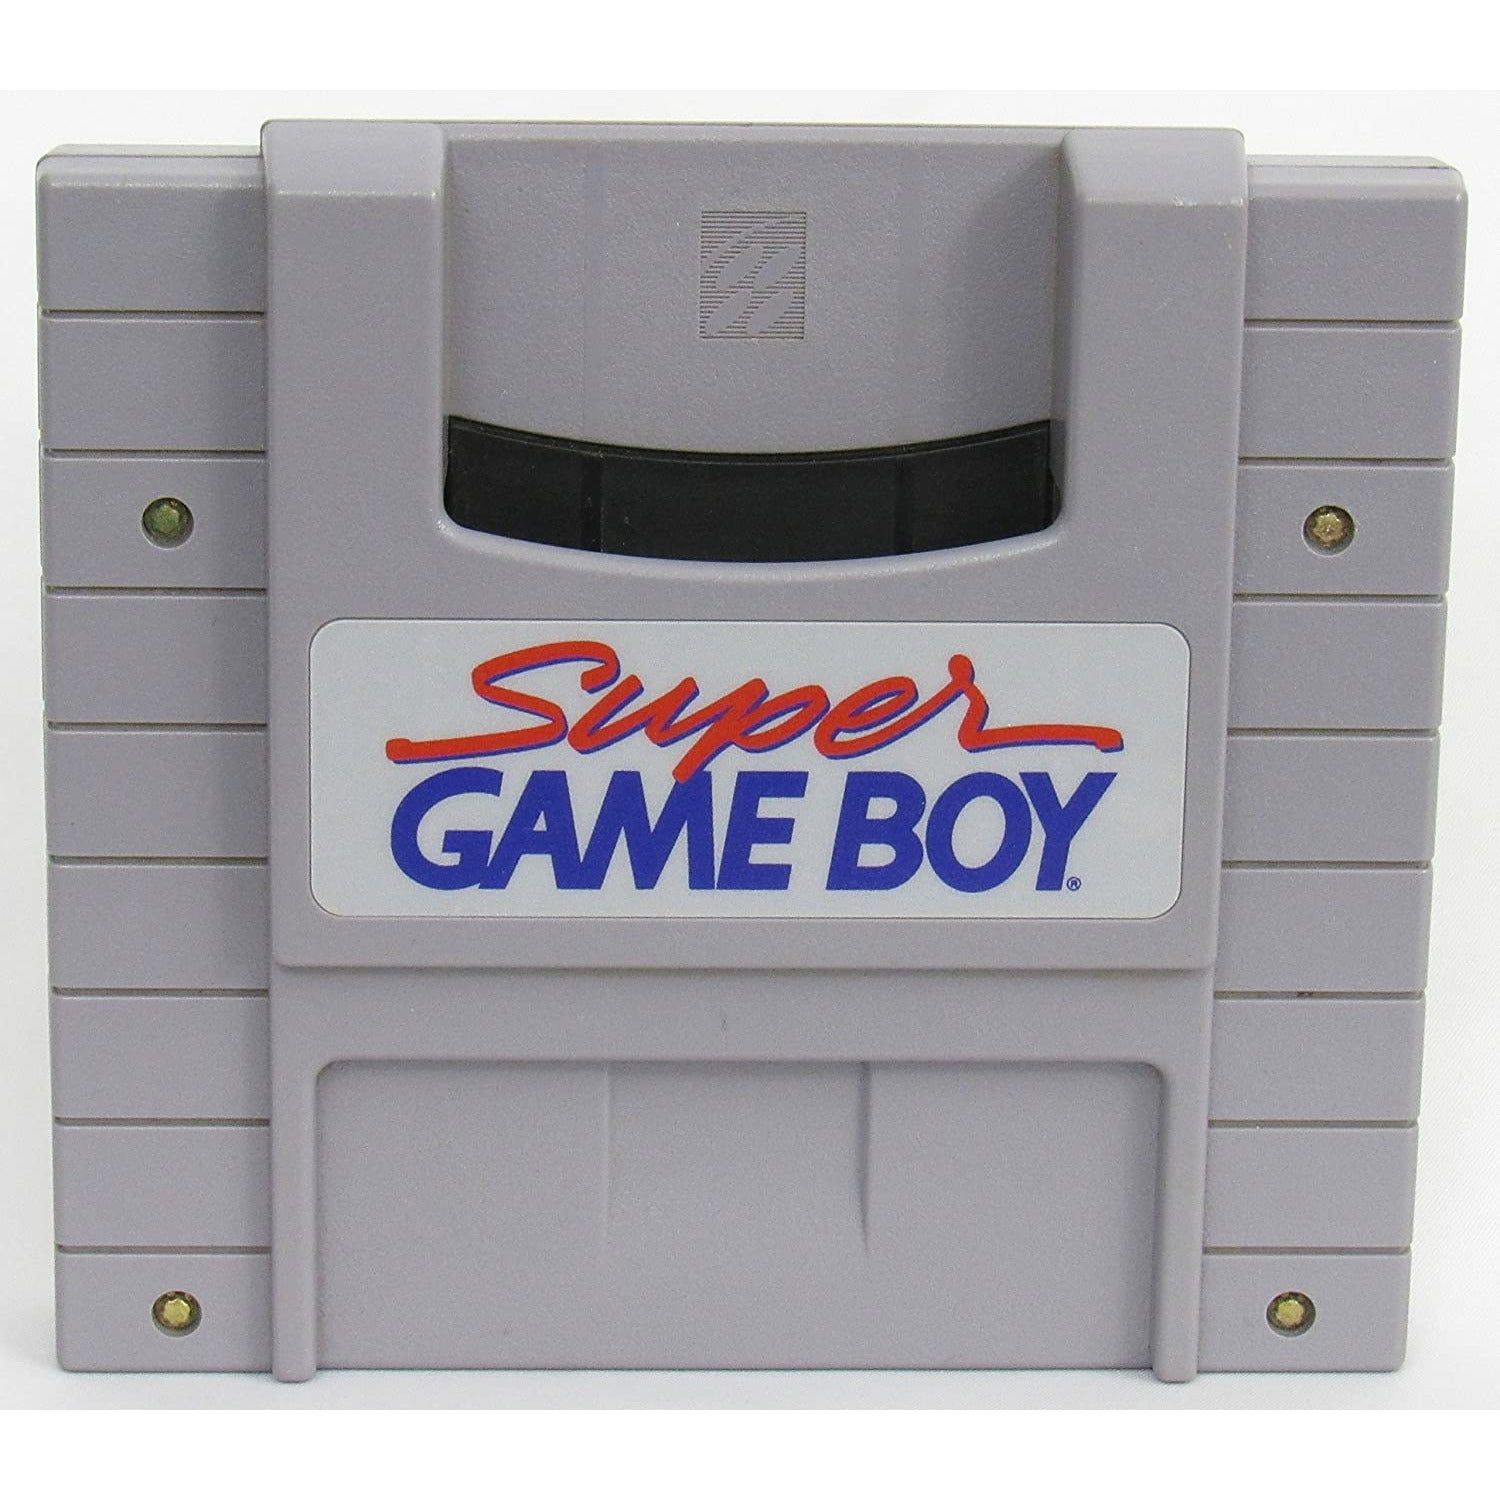 Super Game Boy (Cartridge Only)